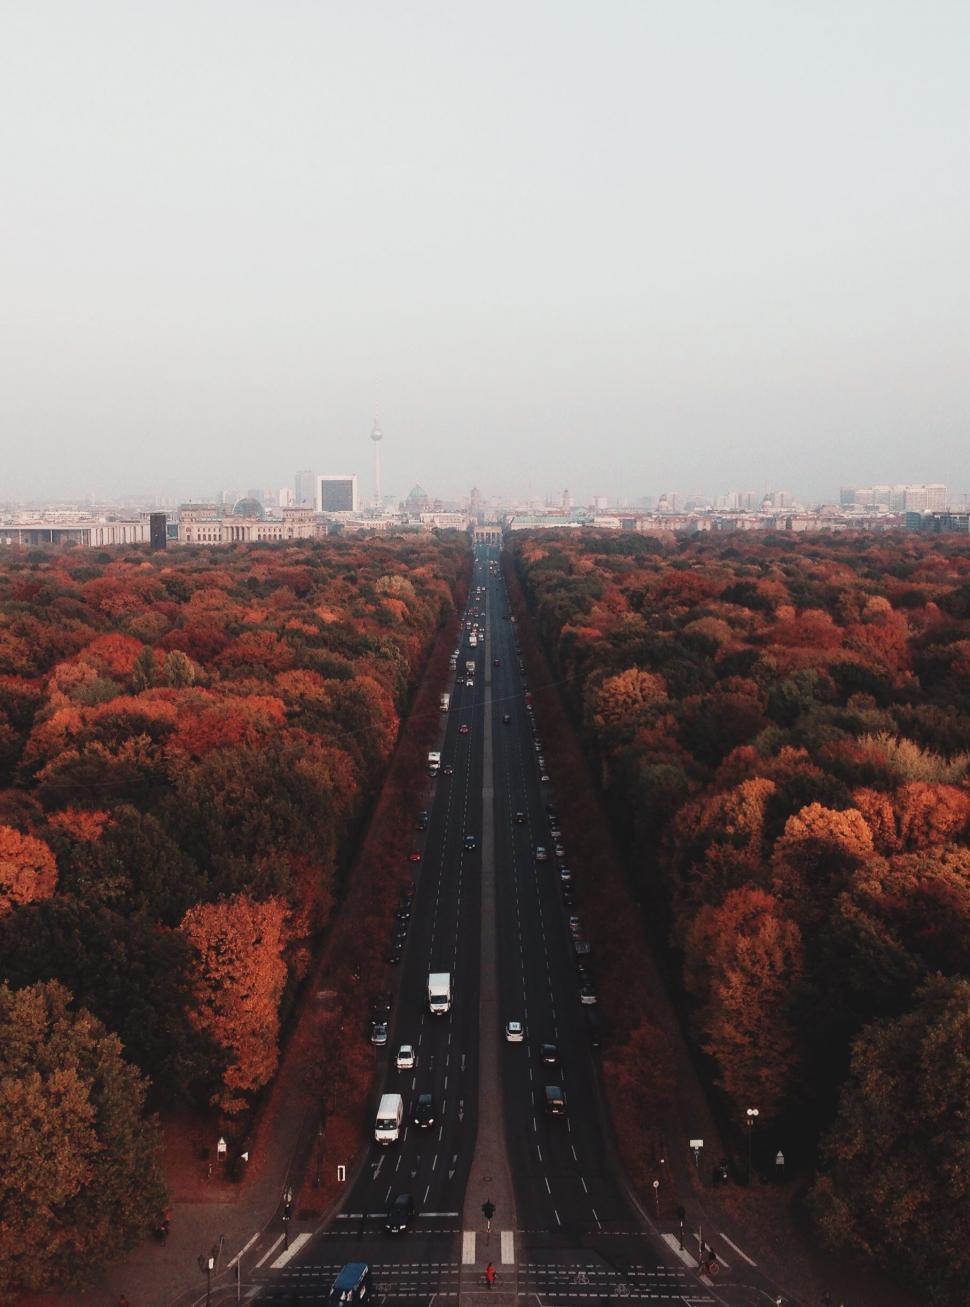 Free Image of Aerial View of Highway Surrounded by Trees 